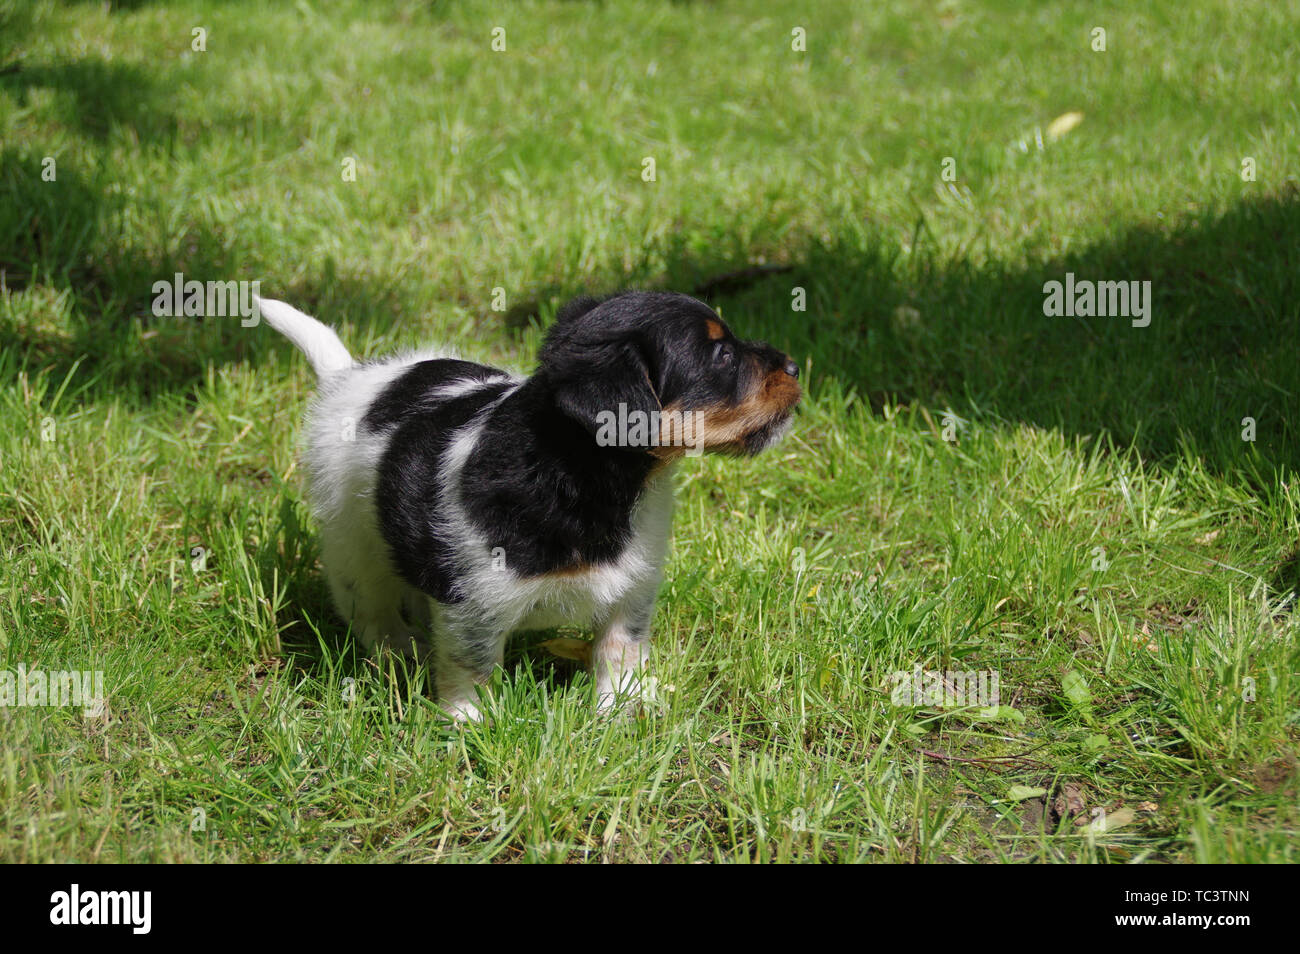 The pinted puppy is walking on the grass. The little dog gets to know the world with curiosity. Stock Photo